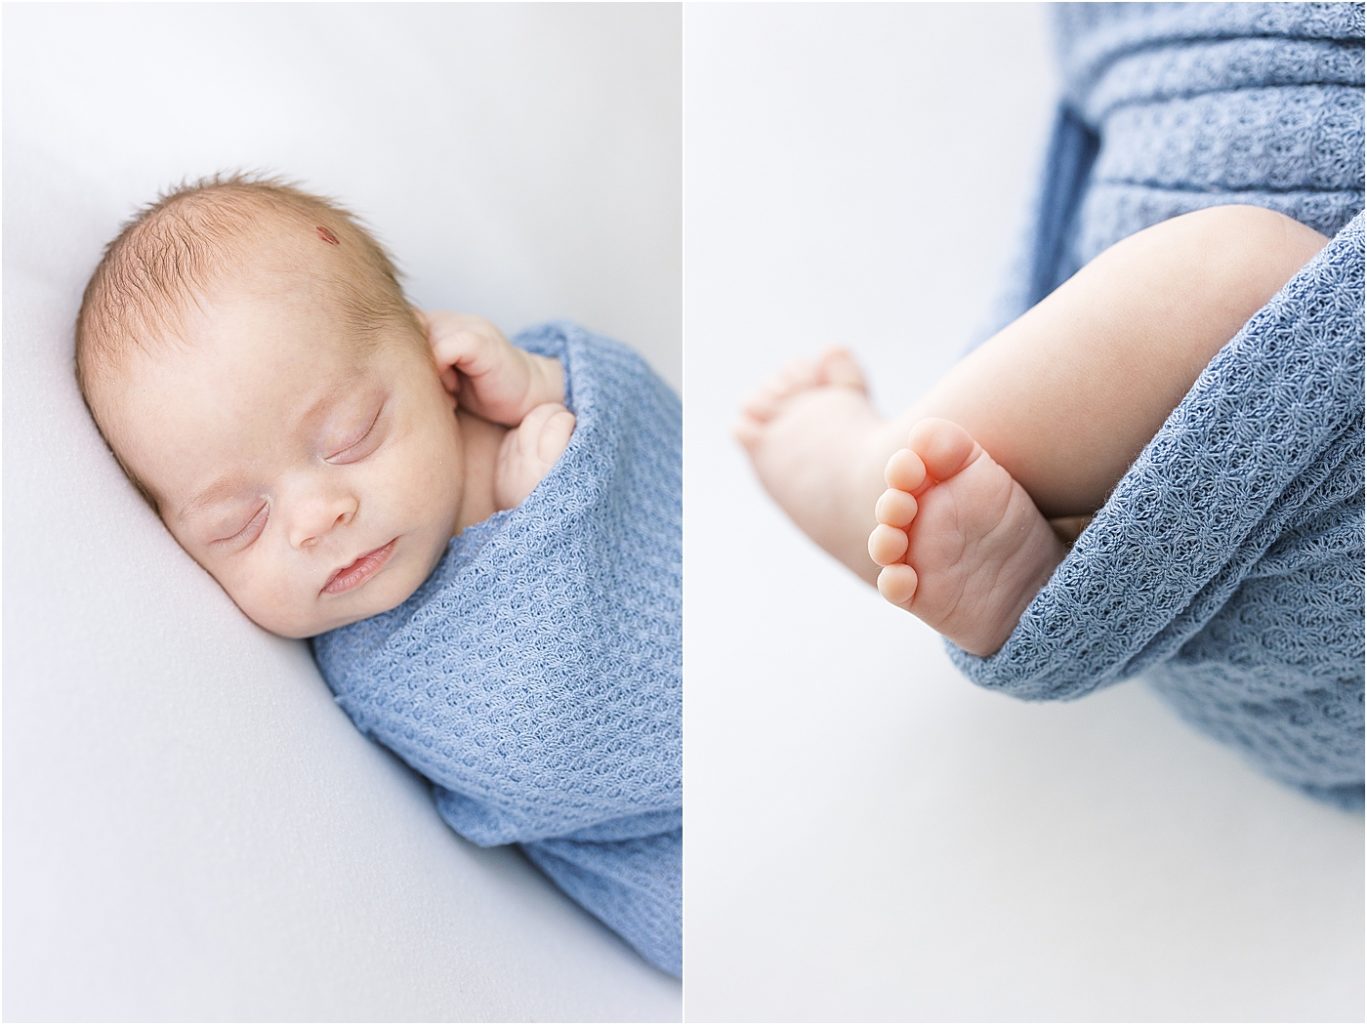 Premie newborn session with baby boy in studio in Fishers. Photo by Lindsay Konopa Photography.